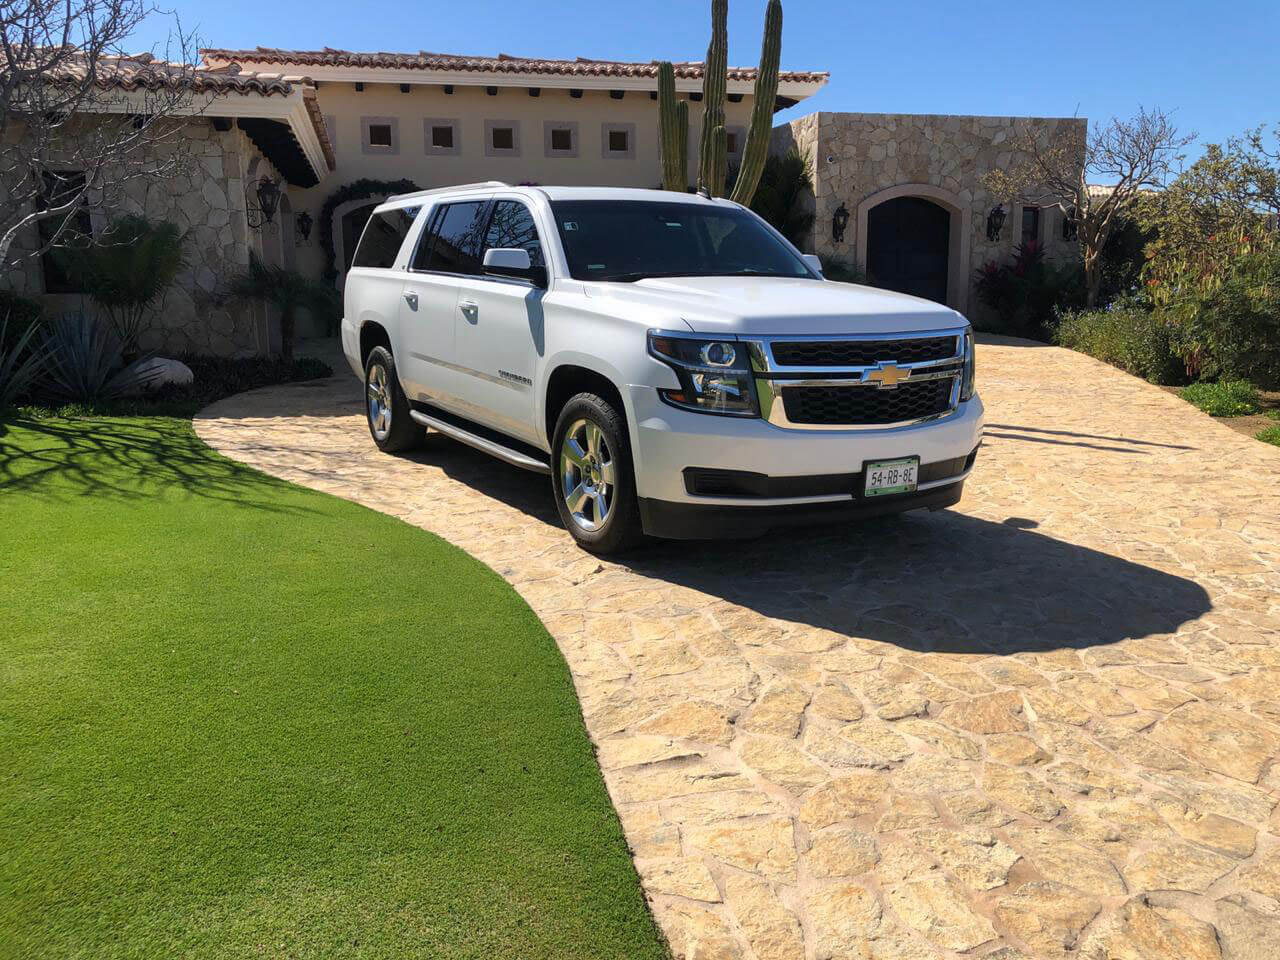 White Luxury SUV leaving private residence